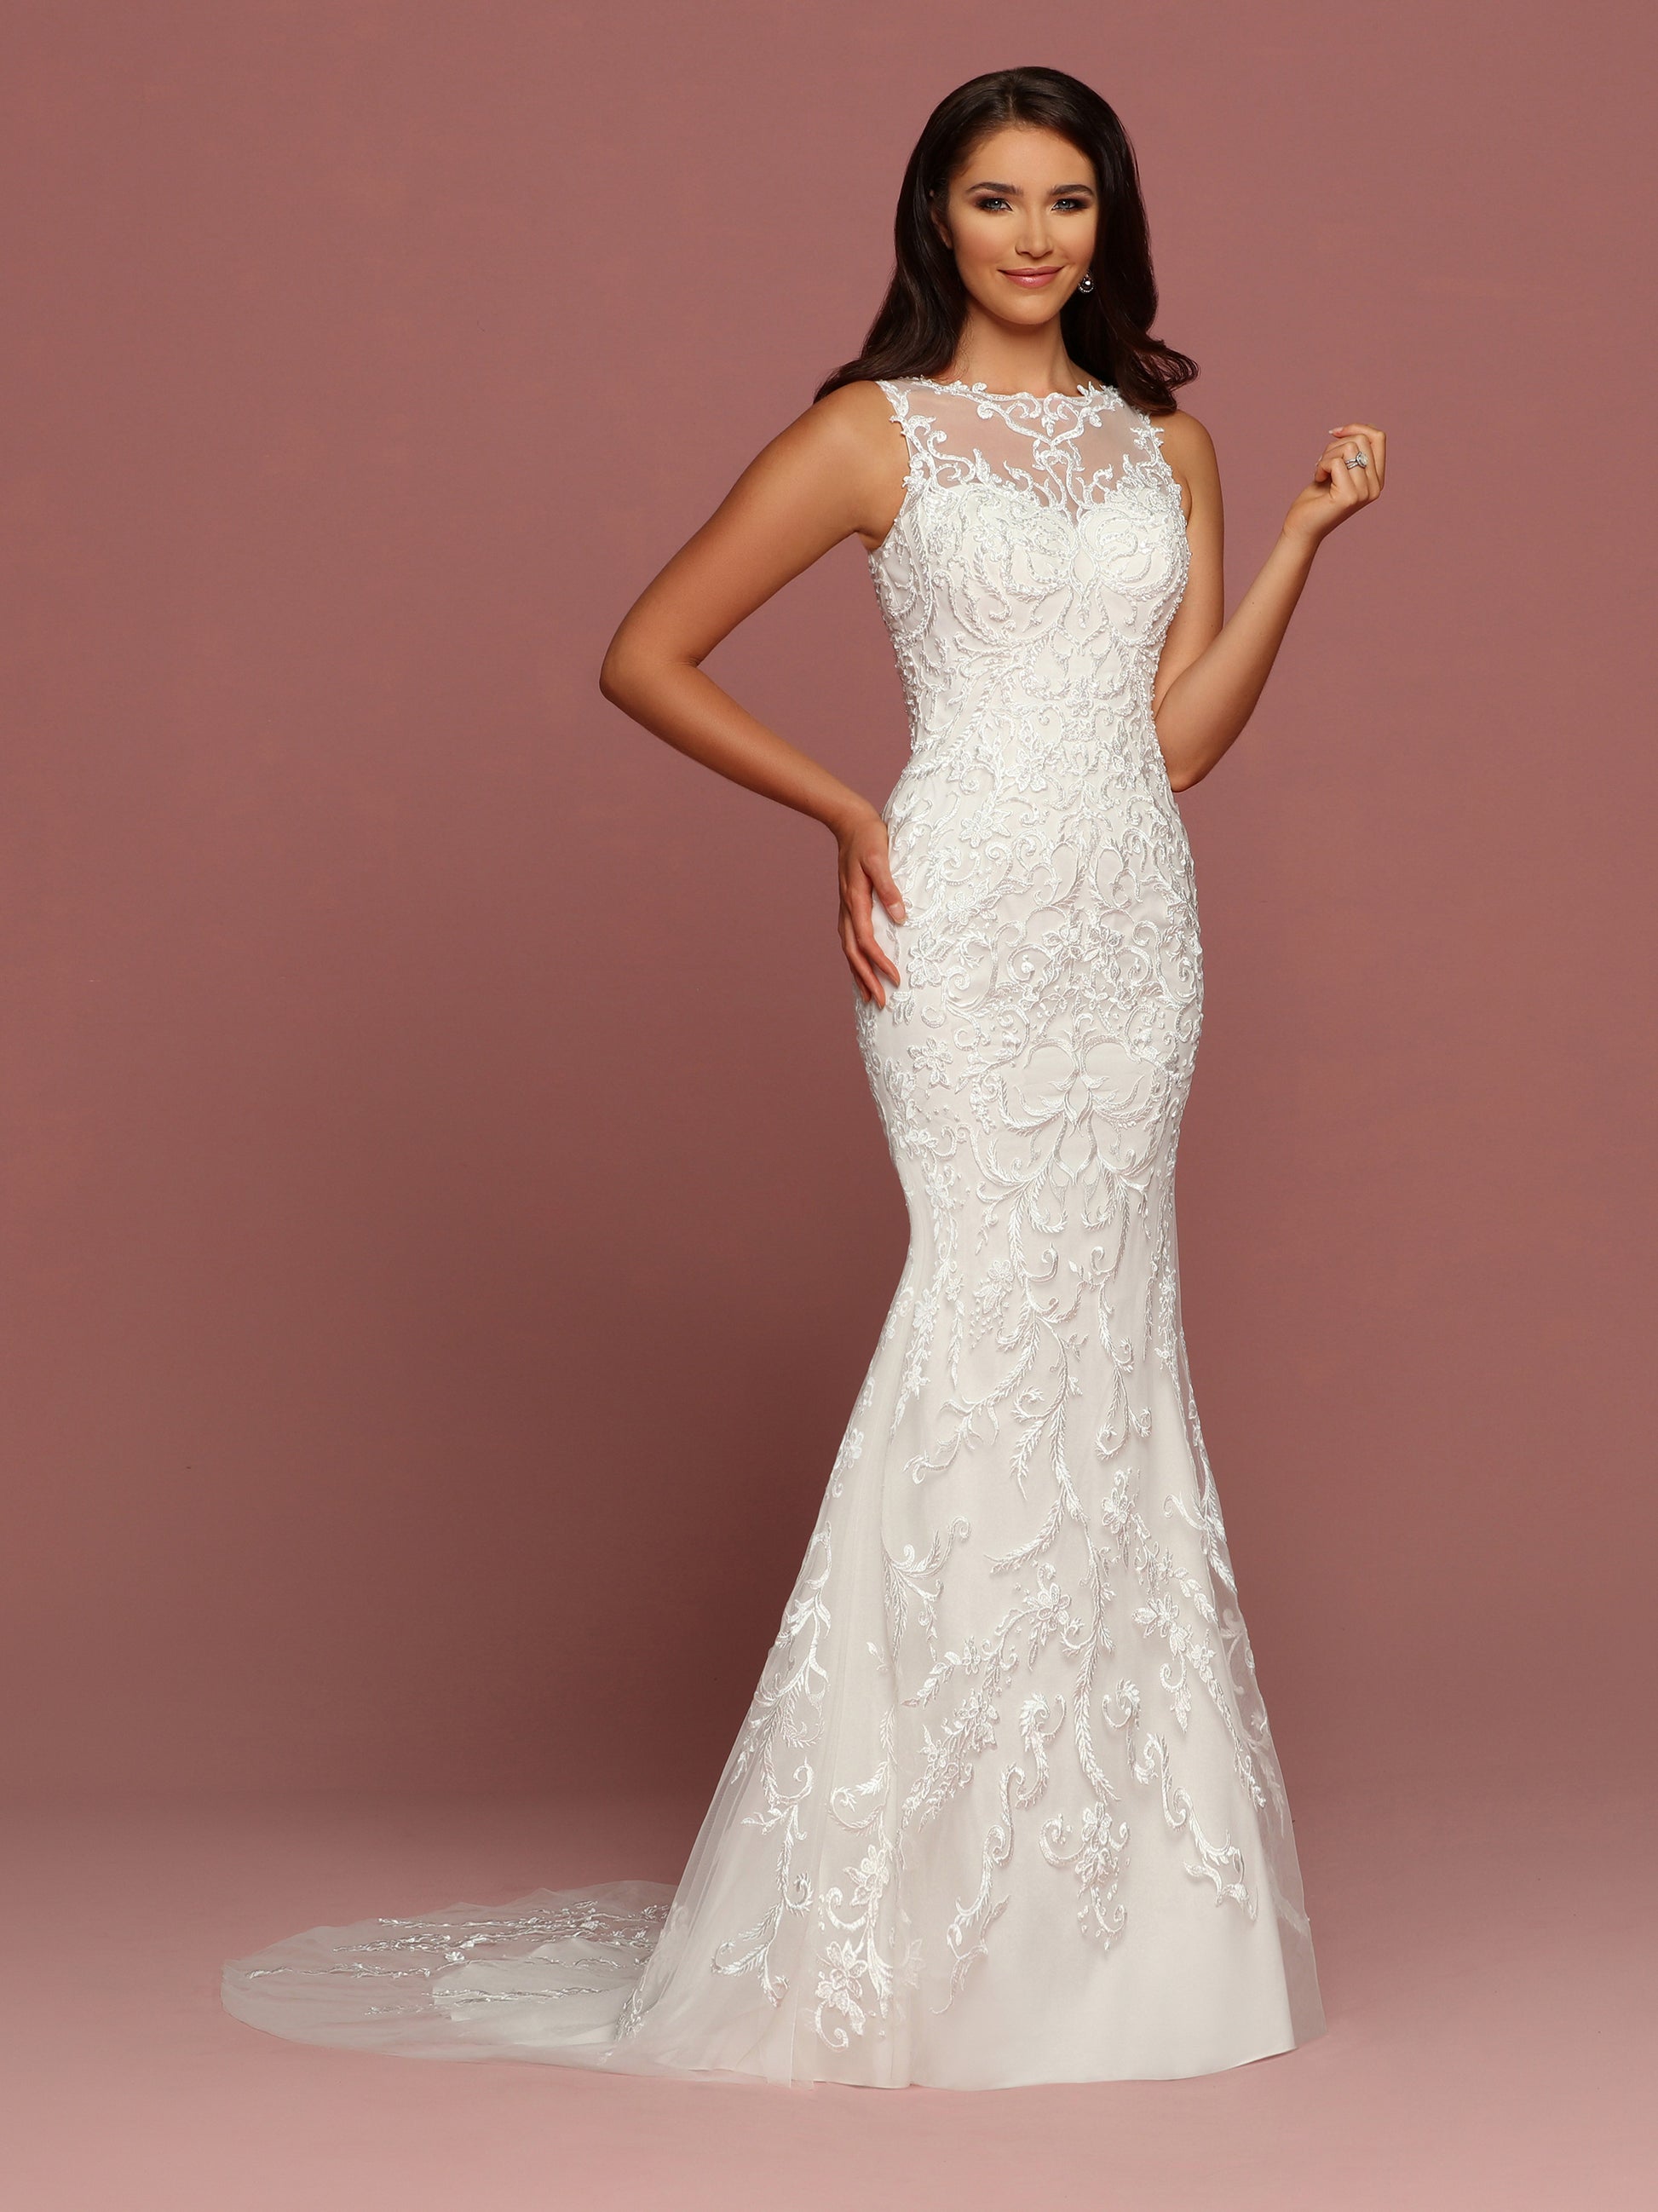 Davinci Bridal 50481 is a fitted mermaid silhouette wedding dress. Featuring a Sheer Lace Illusion high neckline and back with Button Seam. Embellished Embroidered Tulle. Small train flowing from trumpet skirt.  Available for 1-2 Week Delivery!!!  Available Sizes: 2,4,6,8,10,12,14,16,18,20  Available Colors: Ivory  Available Colors: Ivory, Whi